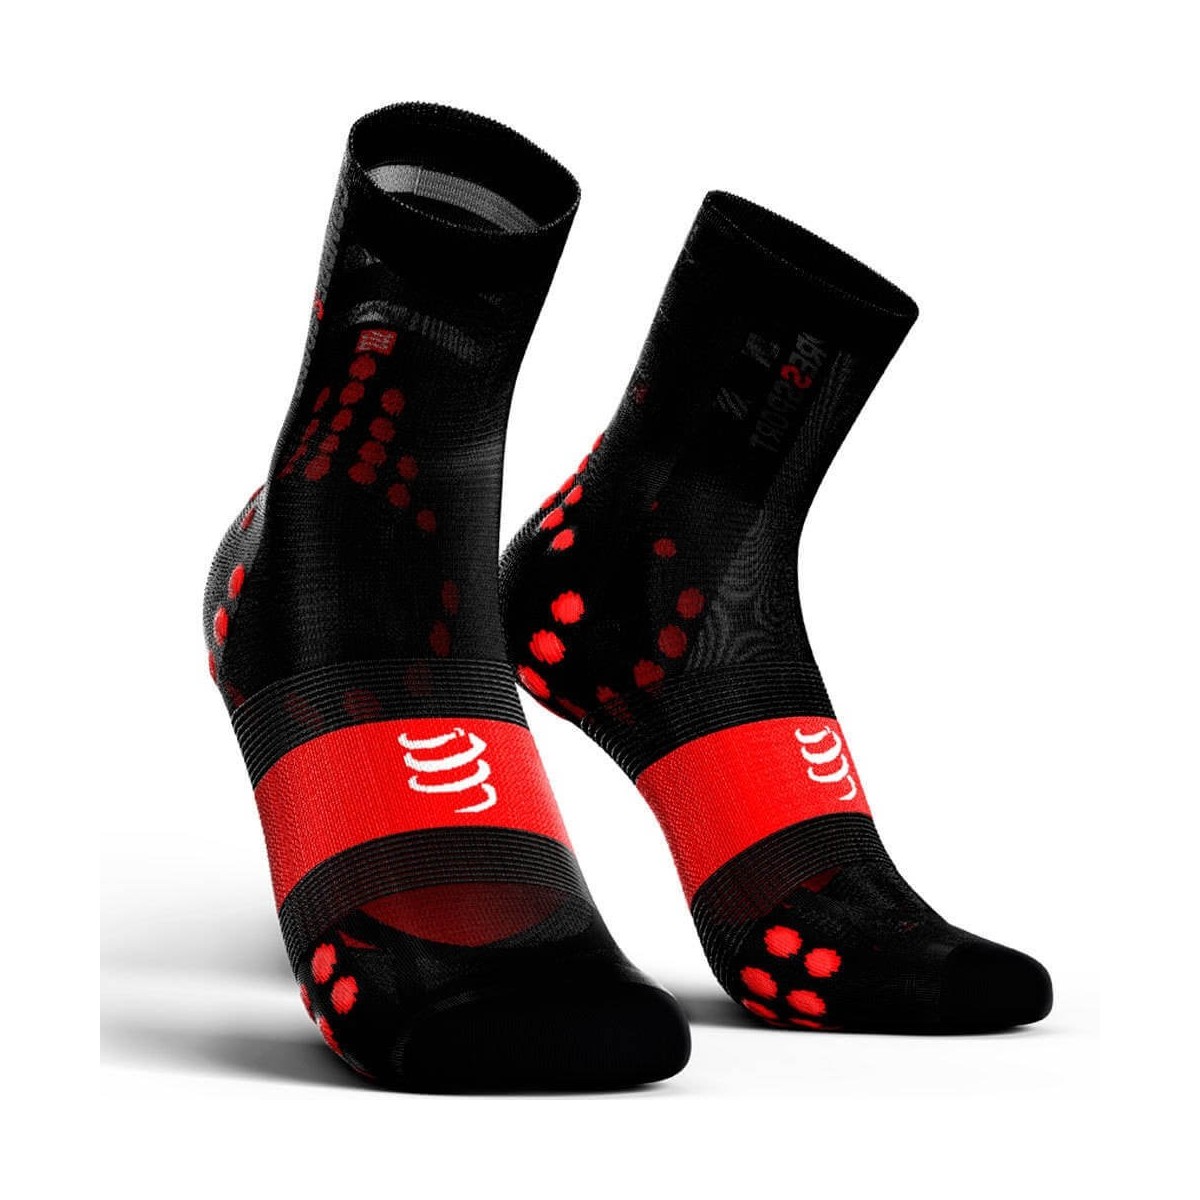 Chaussettes Compressport ProRacing V3 Ultra Light Noir Rouge, Taille Taille 2